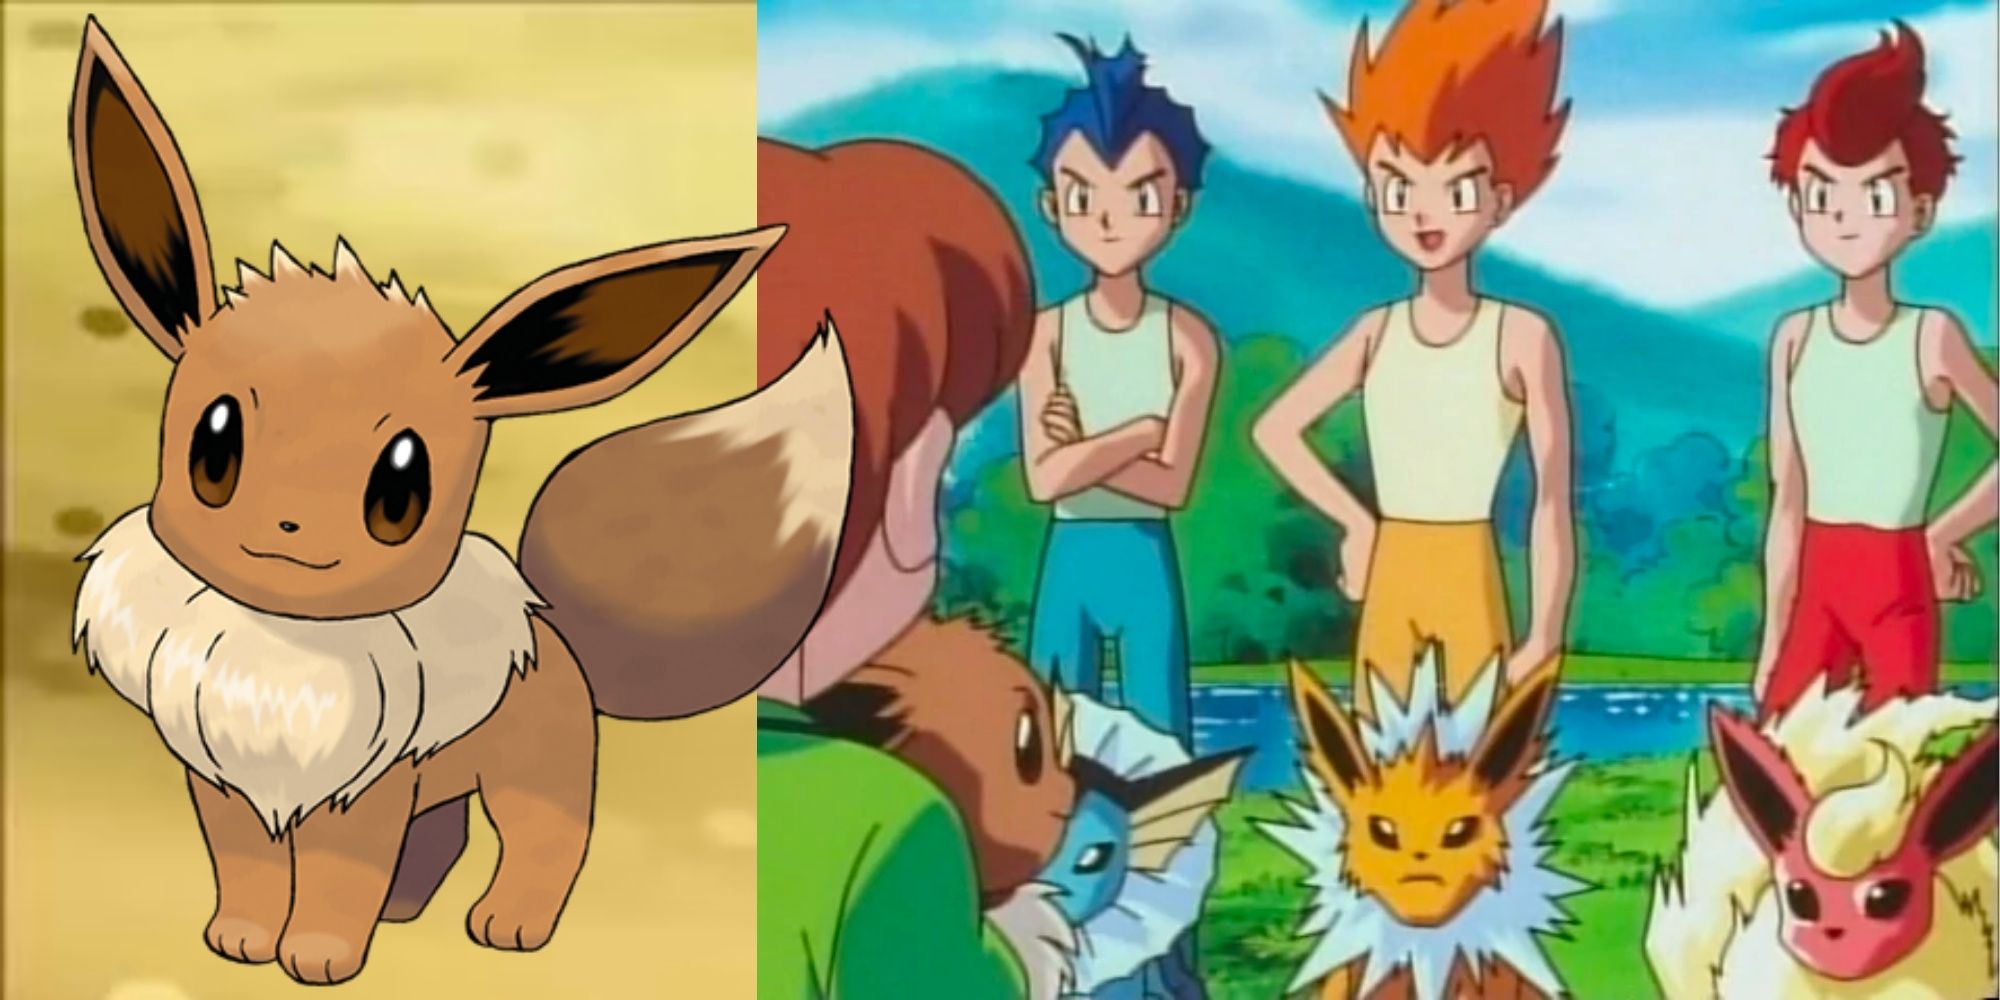 The Eevee Brothers with Jolteon, Vaporeon and Flareon Nintendo Game and Anime Pokemon